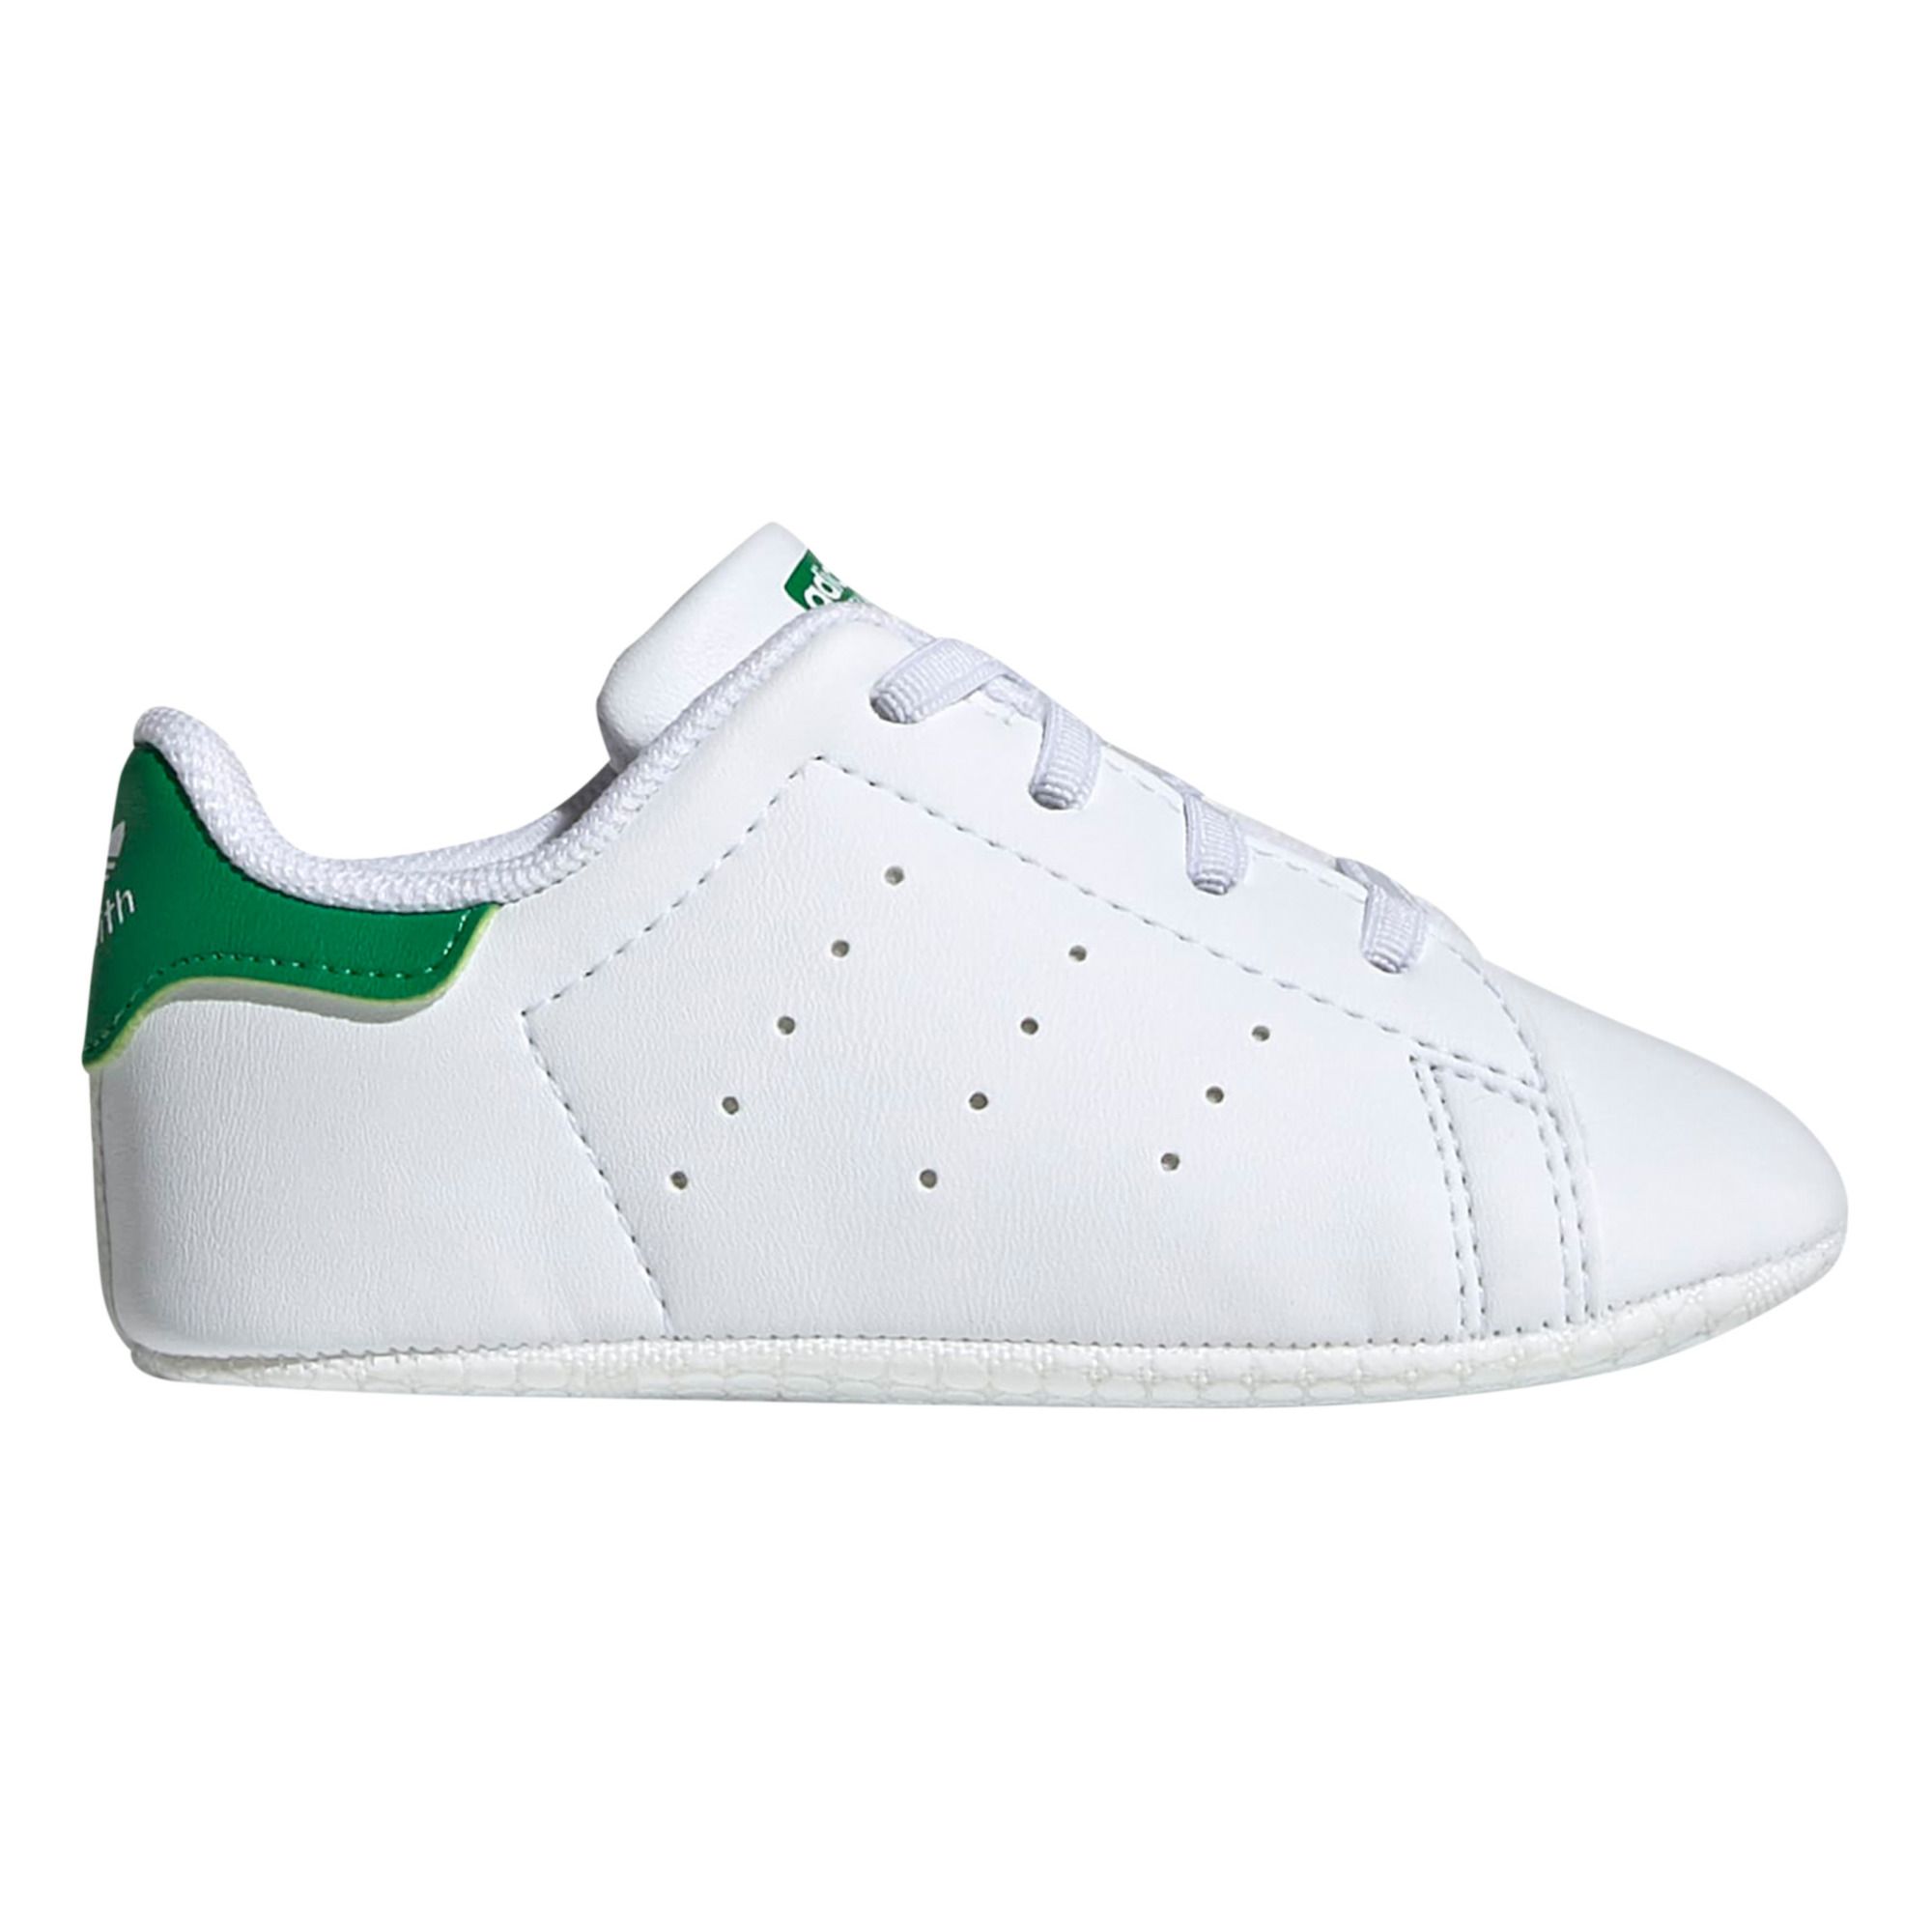 Adidas - Baskets Lacets Stan Smith Crib - Fille - Vert